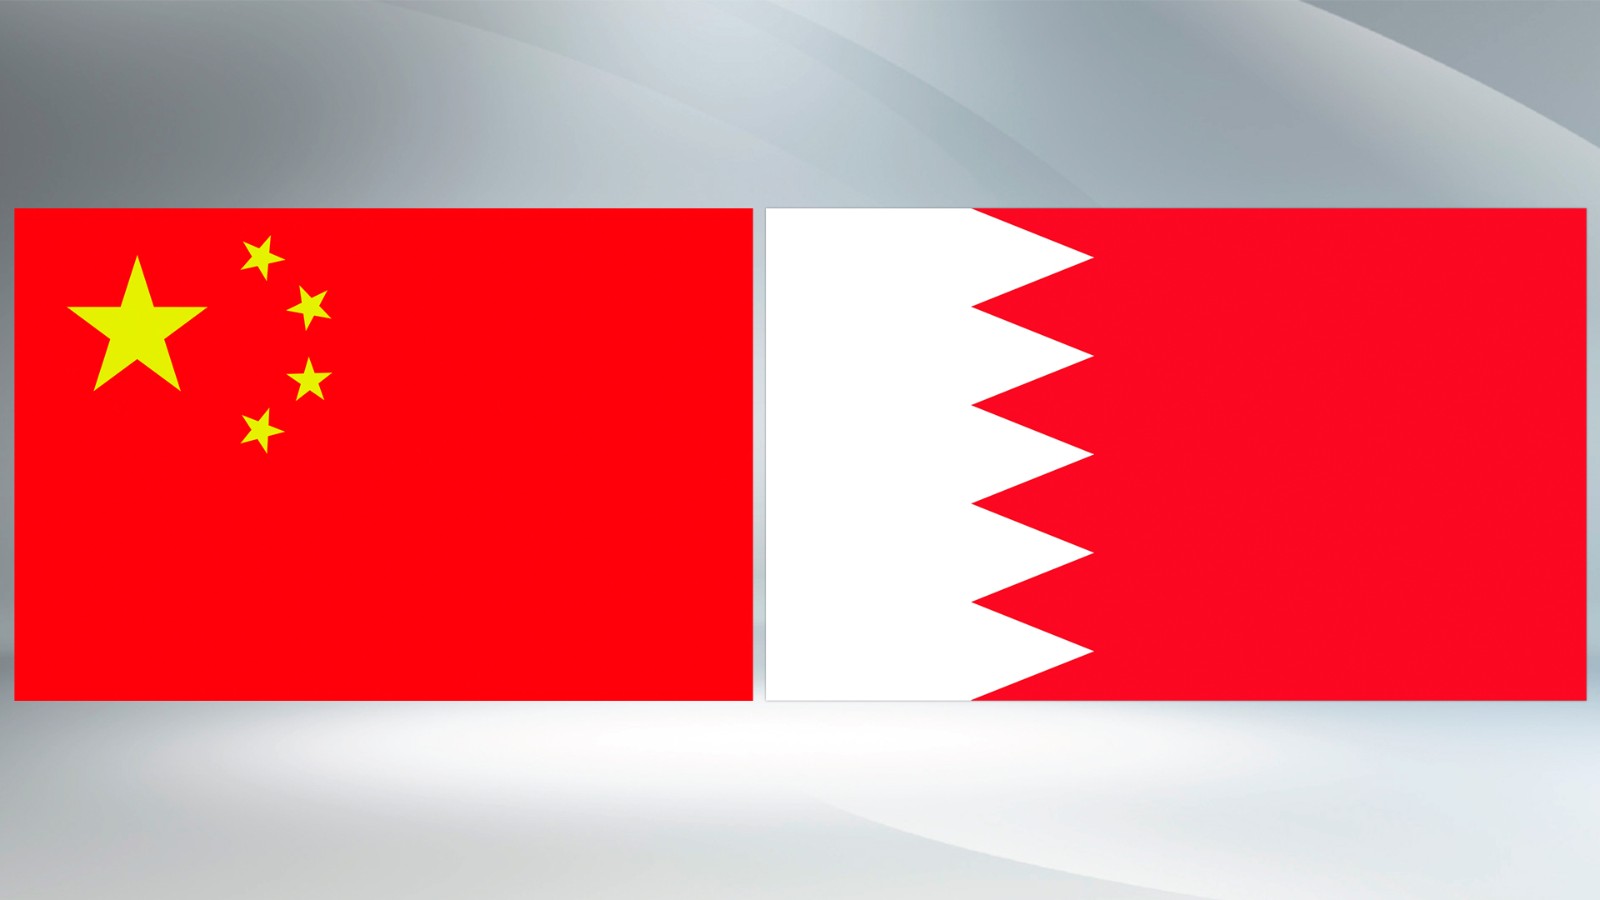 Live: President Xi Jinping holds welcome ceremony for Bahrain's king